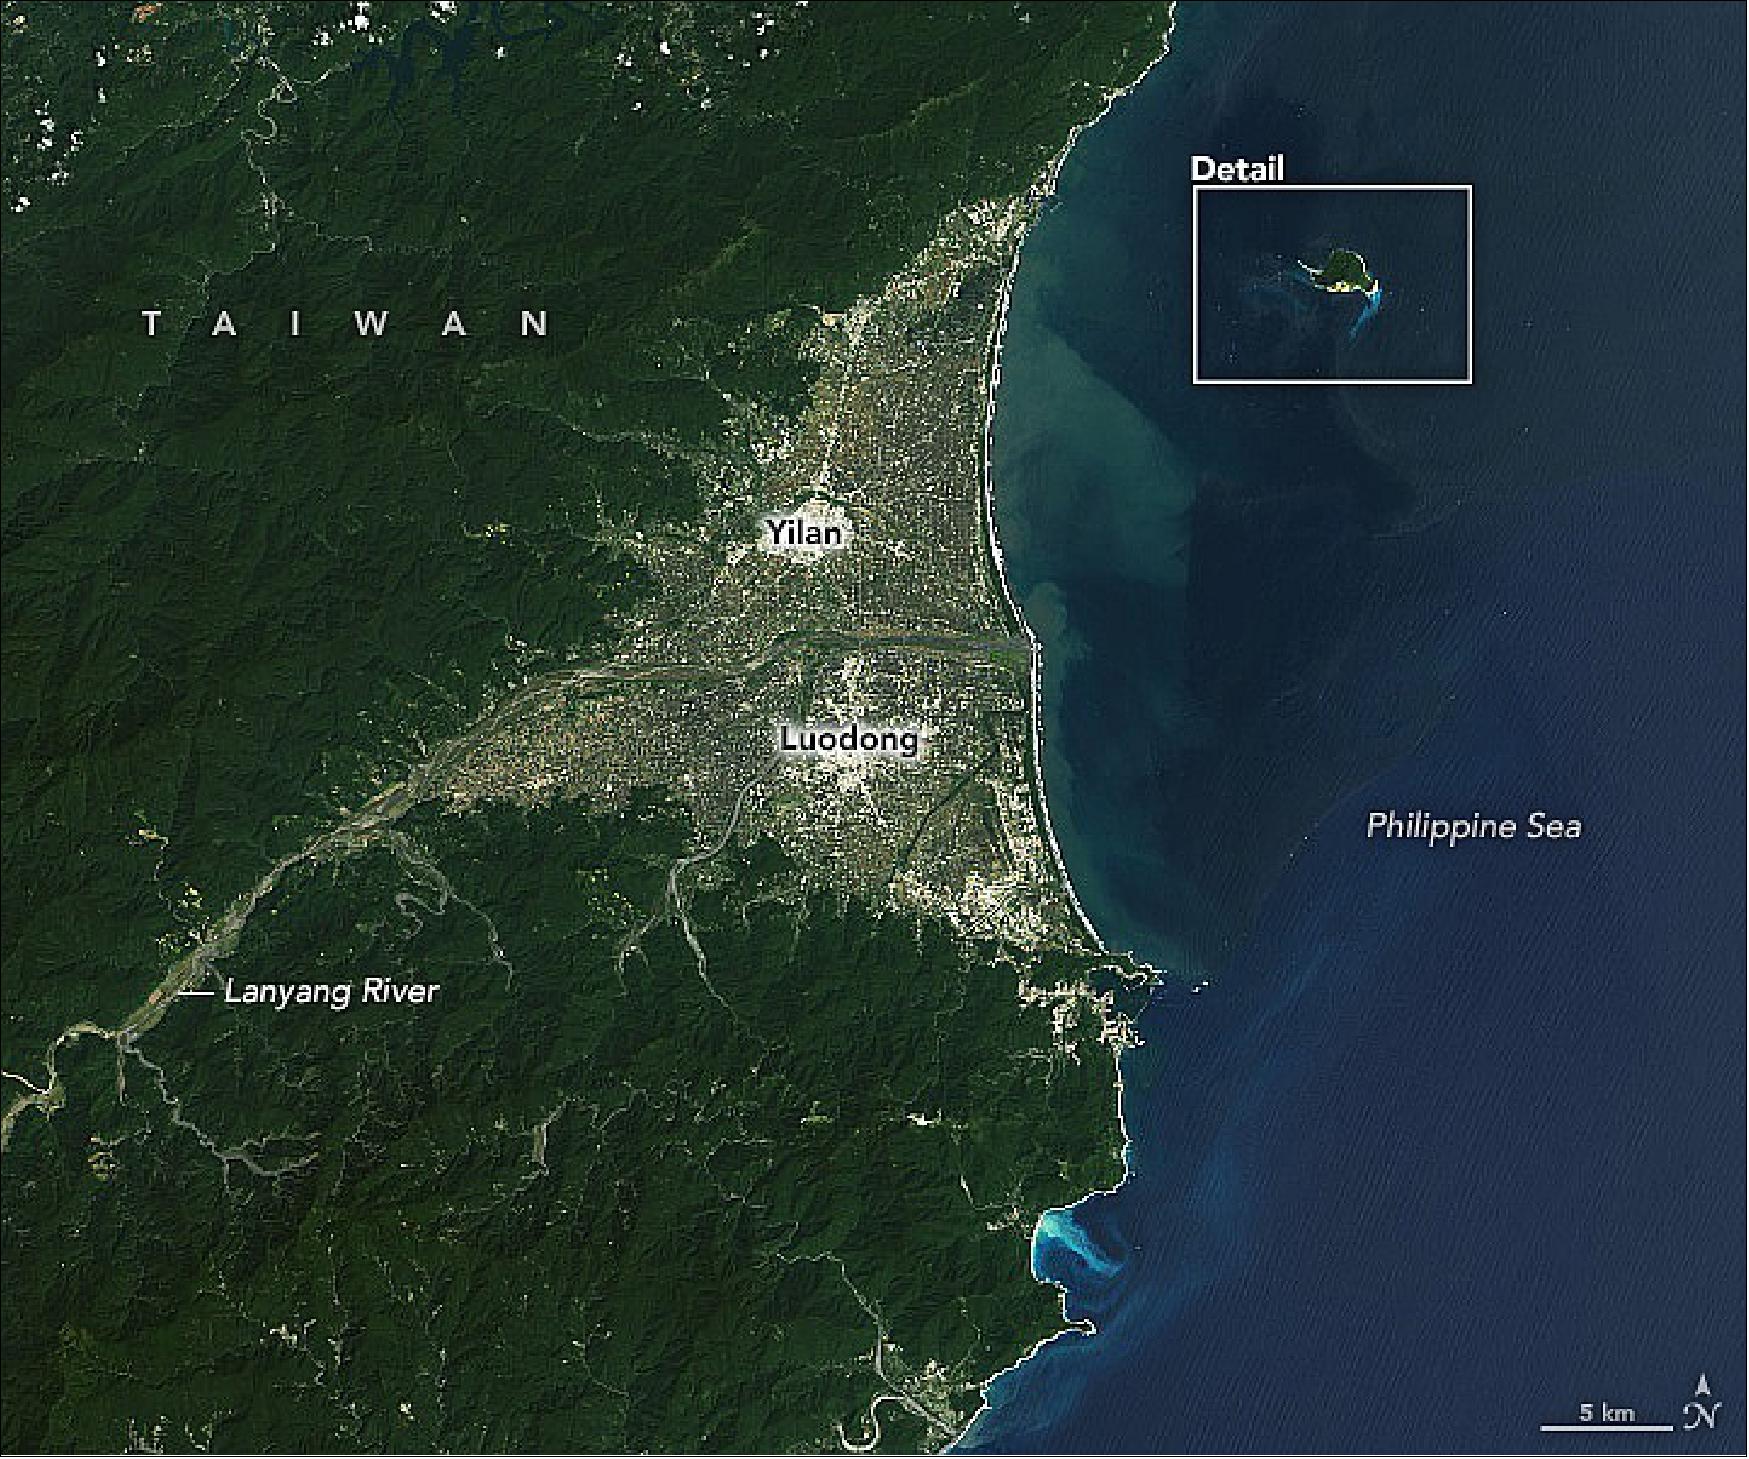 Figure 86: On September 29, 2021, the Operational Land Imager (OLI) on Landsat 8 acquired these images of Guishan Island. The image shows its proximity to mainland Taiwan, about 10 kilometers (6 miles) away (NASA Earth Observatory images by Lauren Dauphin, using Landsat data from the U.S. Geological Survey. Photo “_DSC8877” by kimi kao is licensed under CC BY-NC-ND 2.0. Story by Kathryn Hansen)